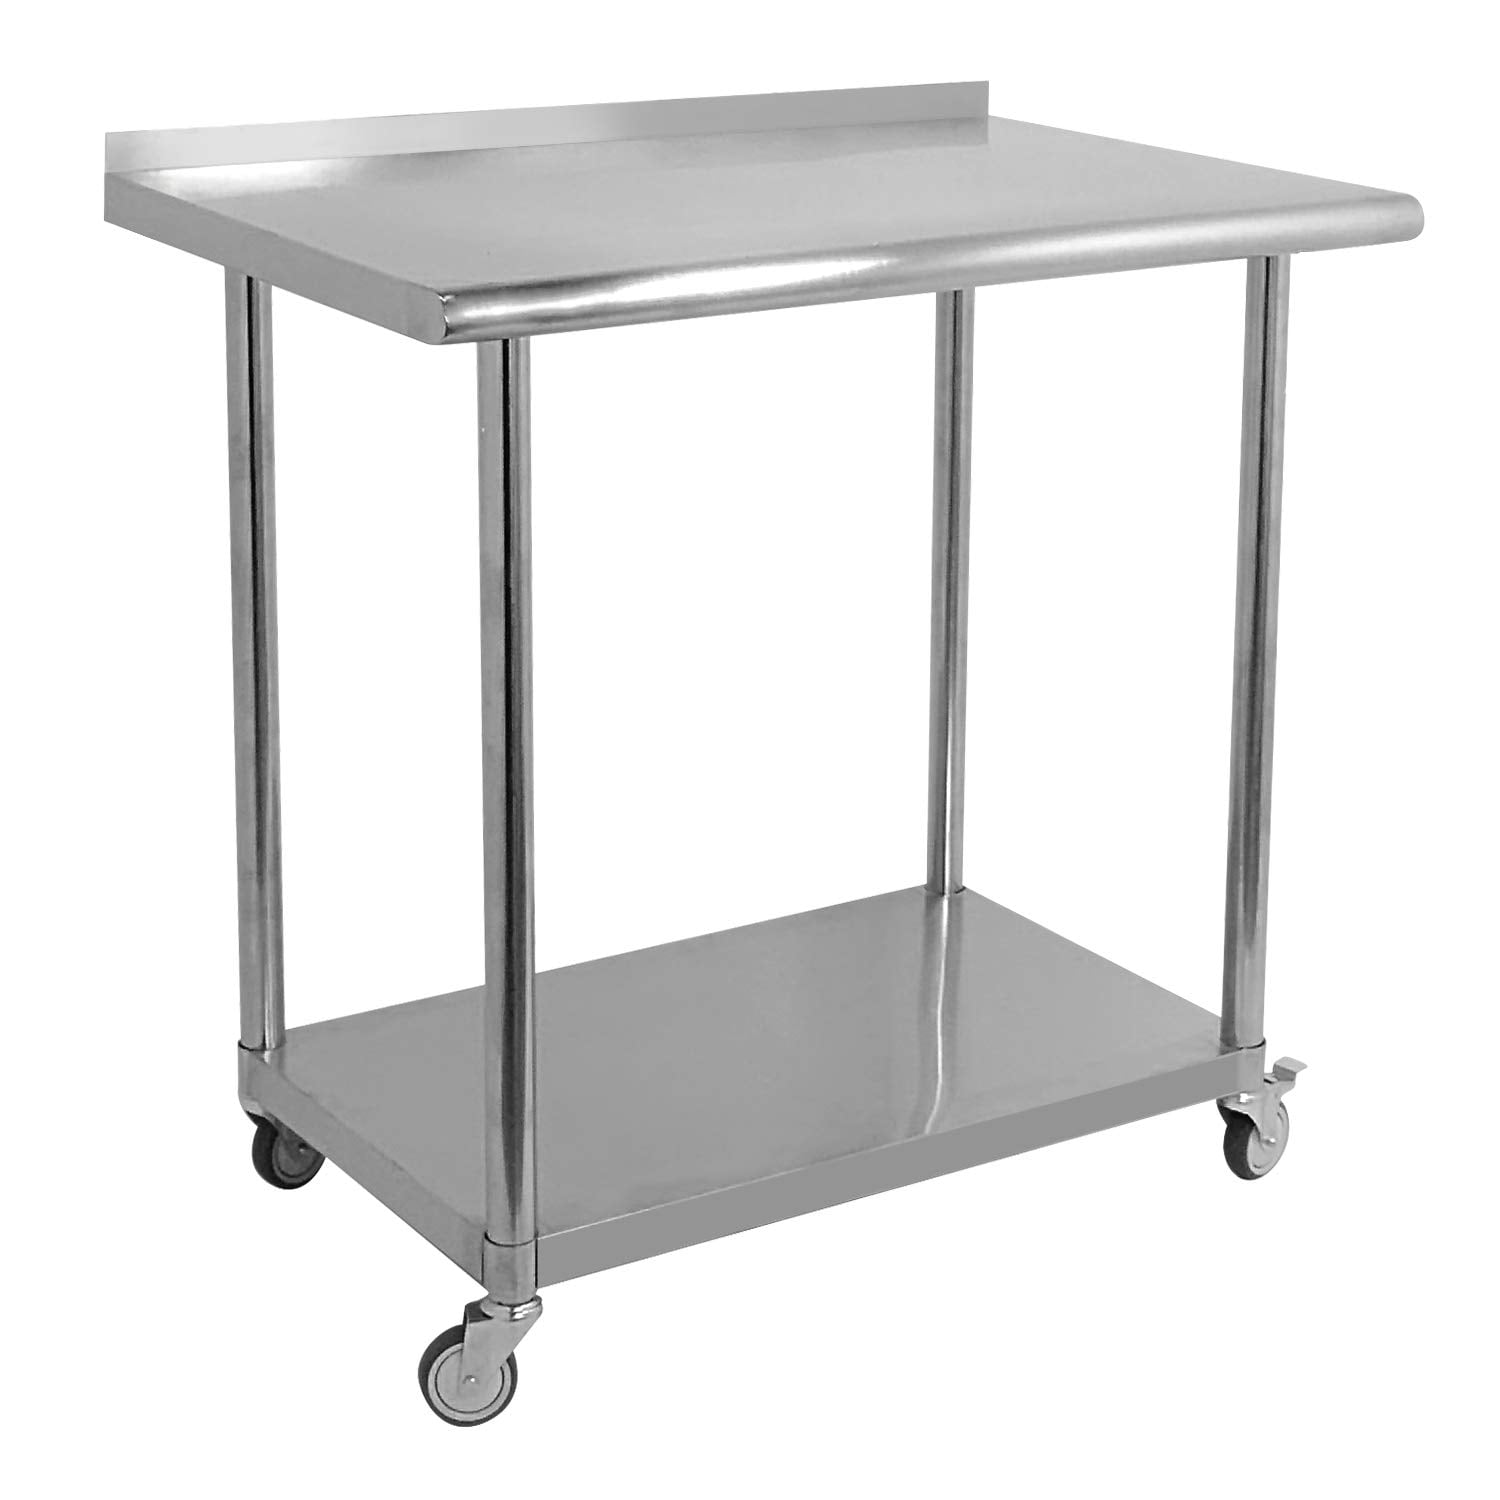 36"x24" Stainless Steel Work Table 4 Casters For Undershelf Cafeteria Silver 